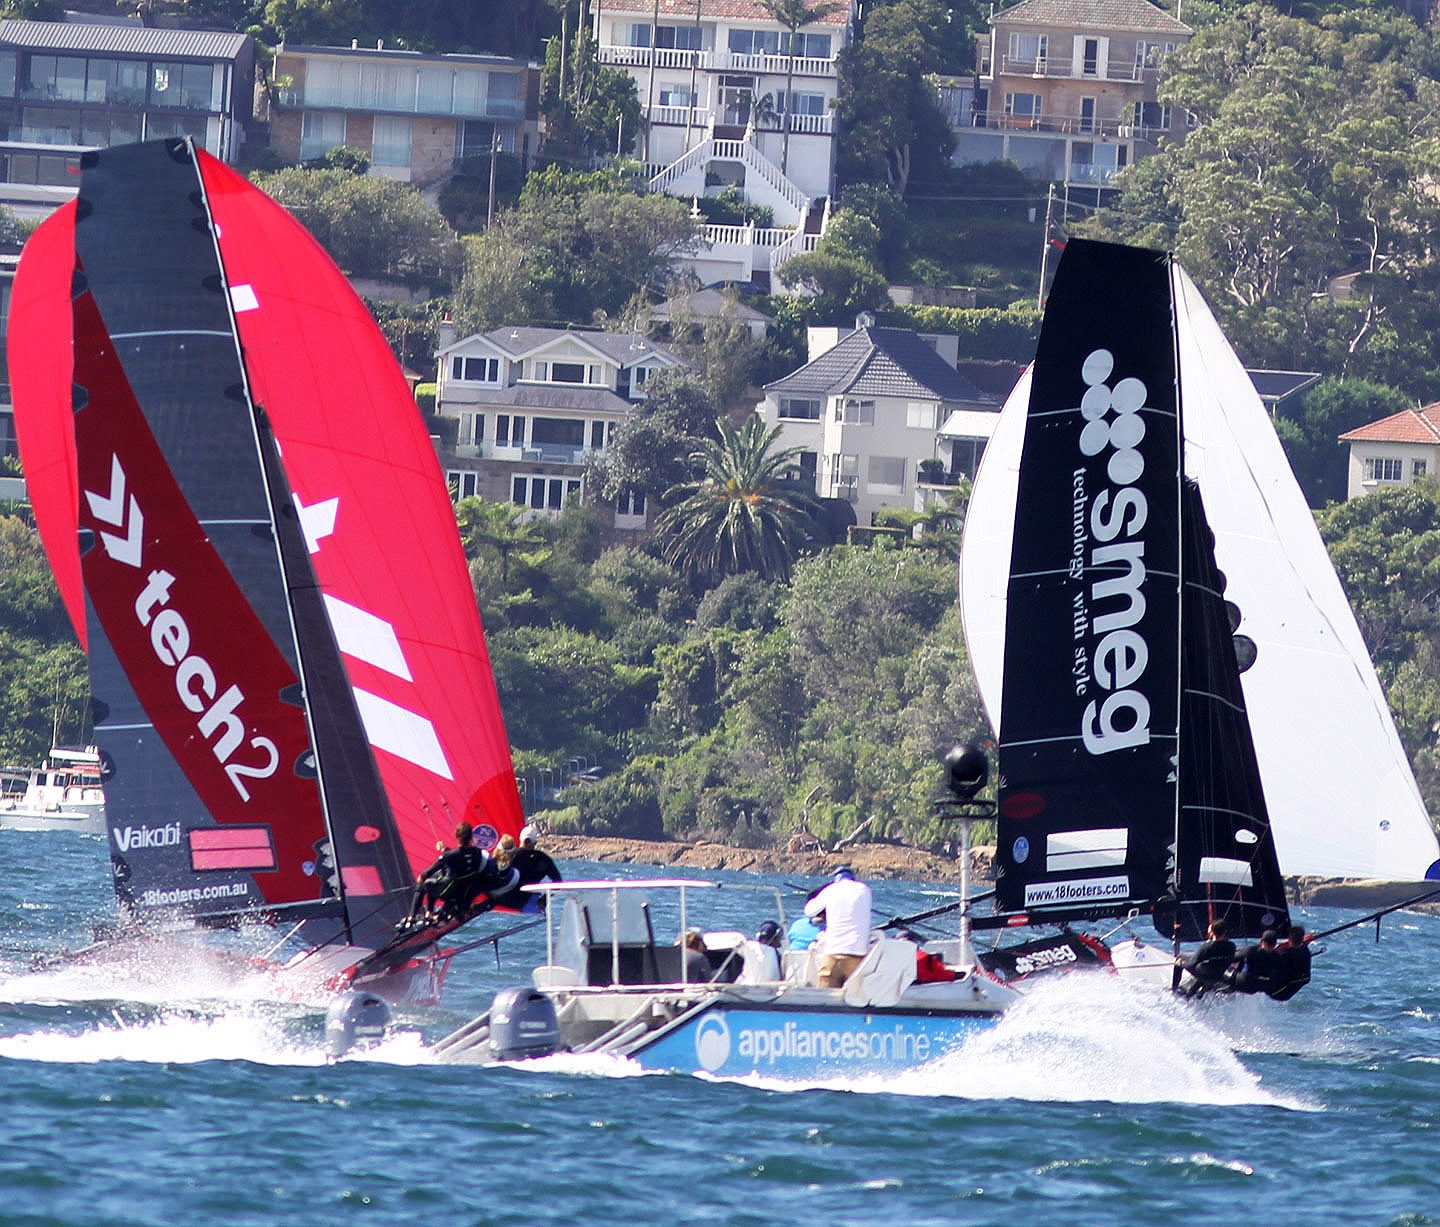  18 Footer  Australian Championship 2020  Sydney AUS  Race 8  tech2 and SMEG duel for victory